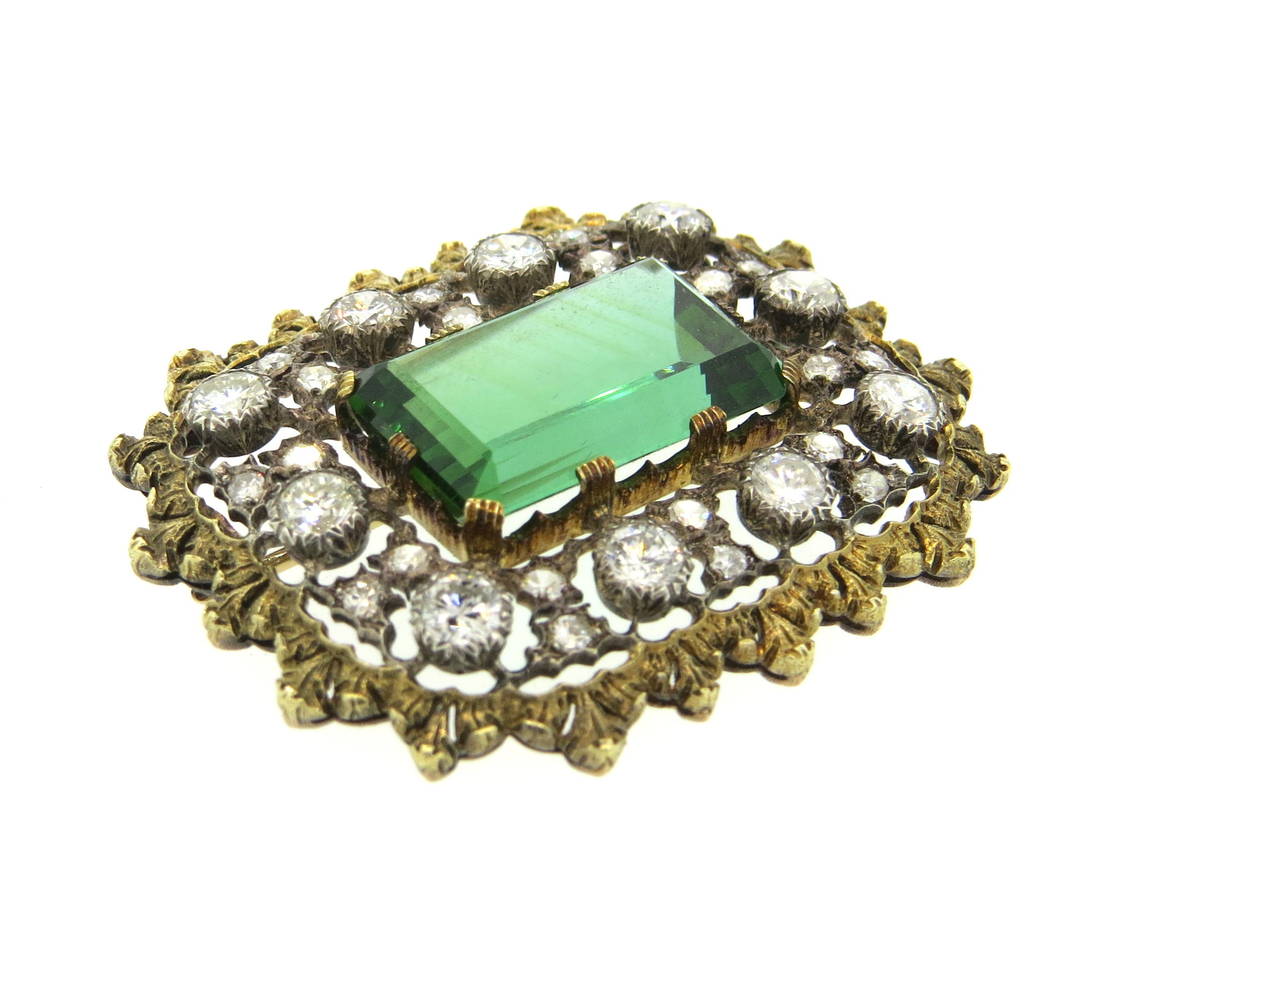 Impressive 18k gold brooch, crafted by Buccellati, featuring approximately 13ct emerald cut green tourmaline as a centerpiece, surrounded with approx. 3.00ctw in GH/VS diamonds. Brooch measures 41mm x 35mm. Marked Buccellati and 750. Weight of the